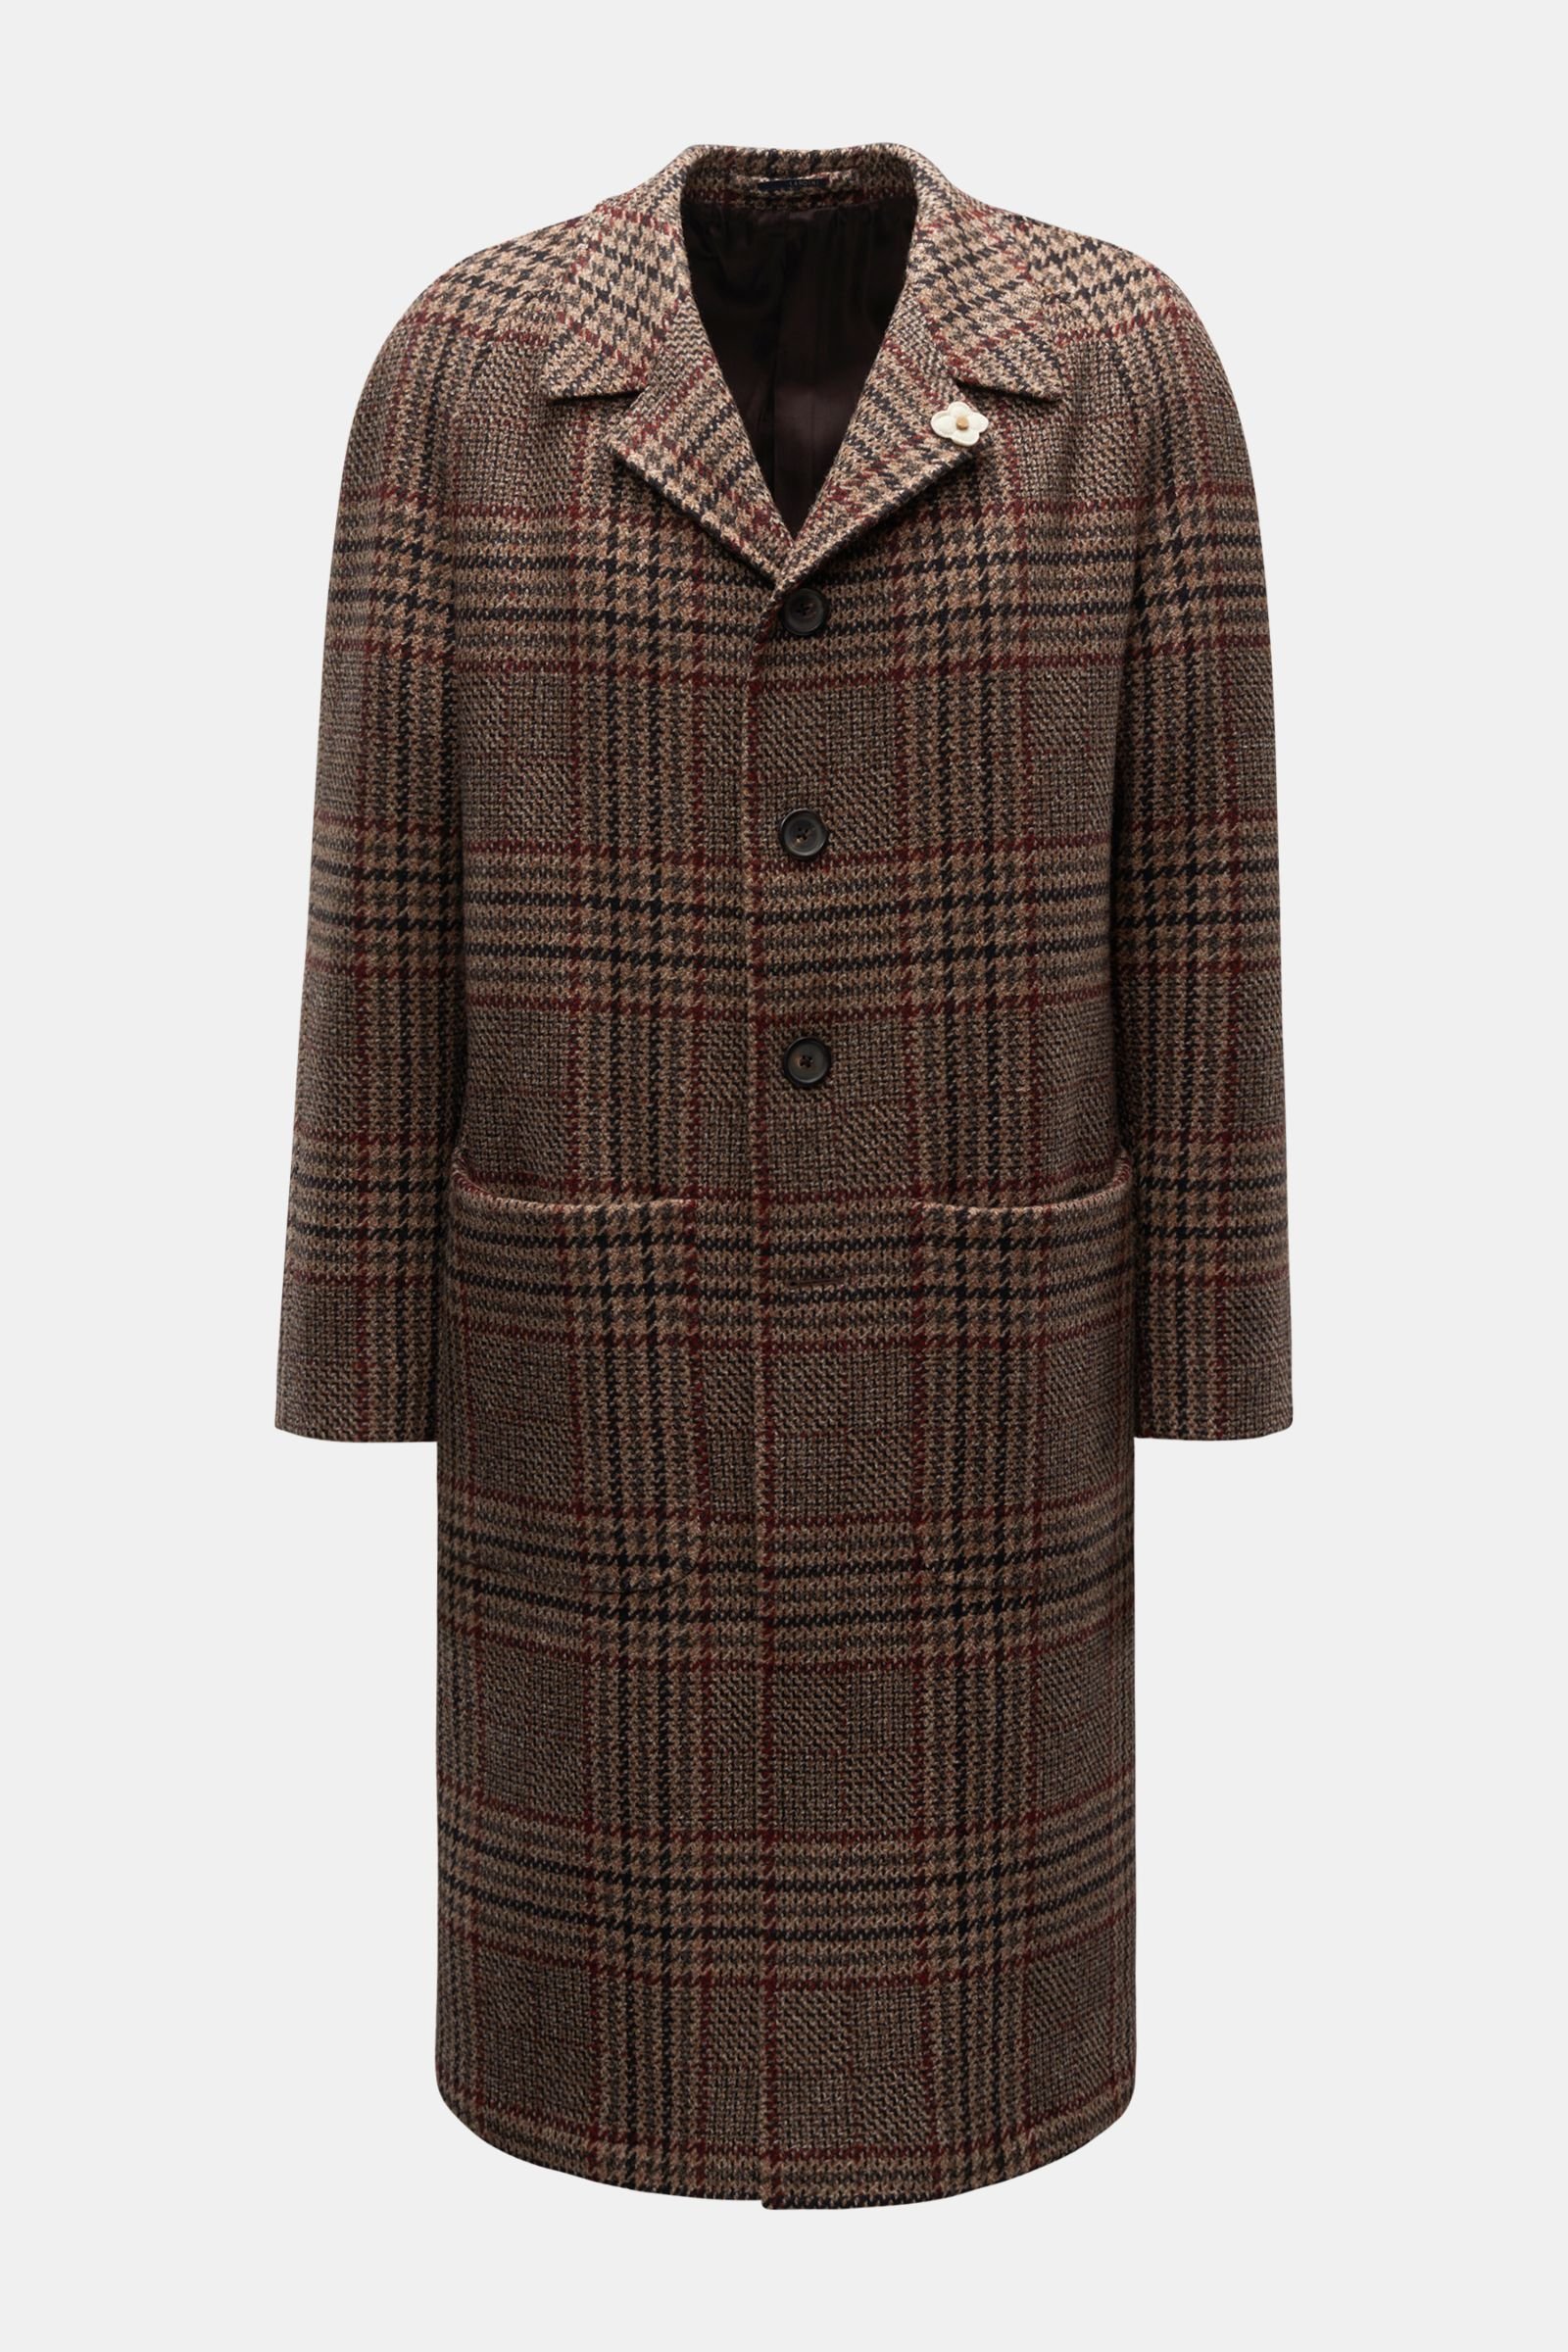 Coat light brown/black/red checked